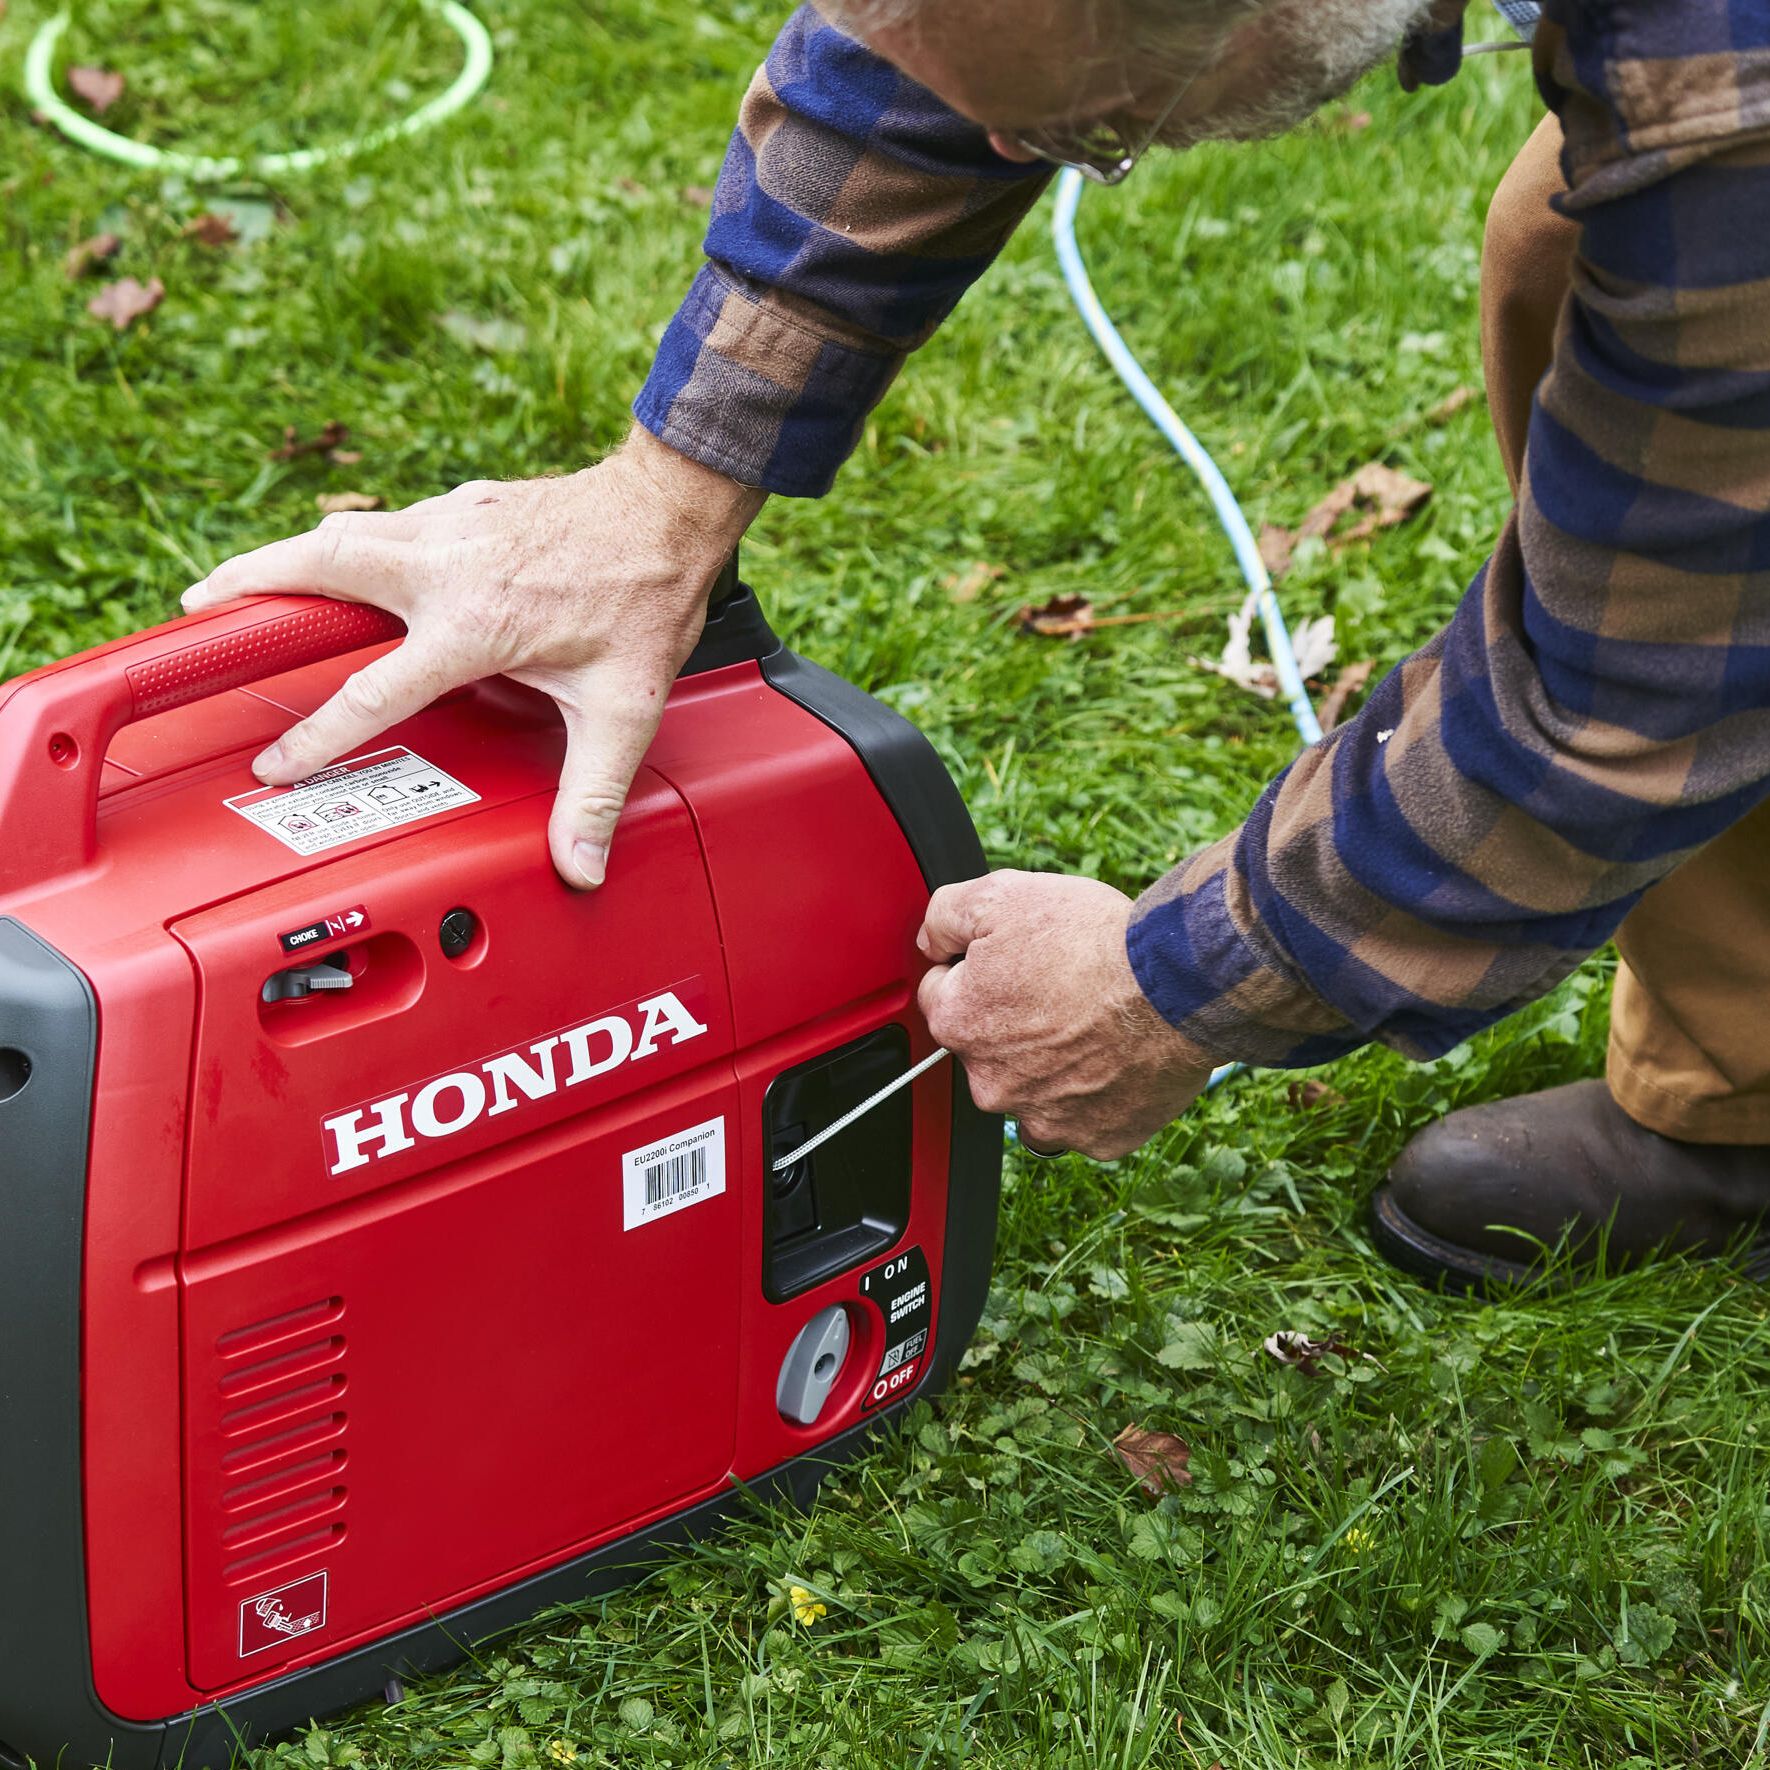 The 12 Best Home Generators to Keep Your House or Appliances Running